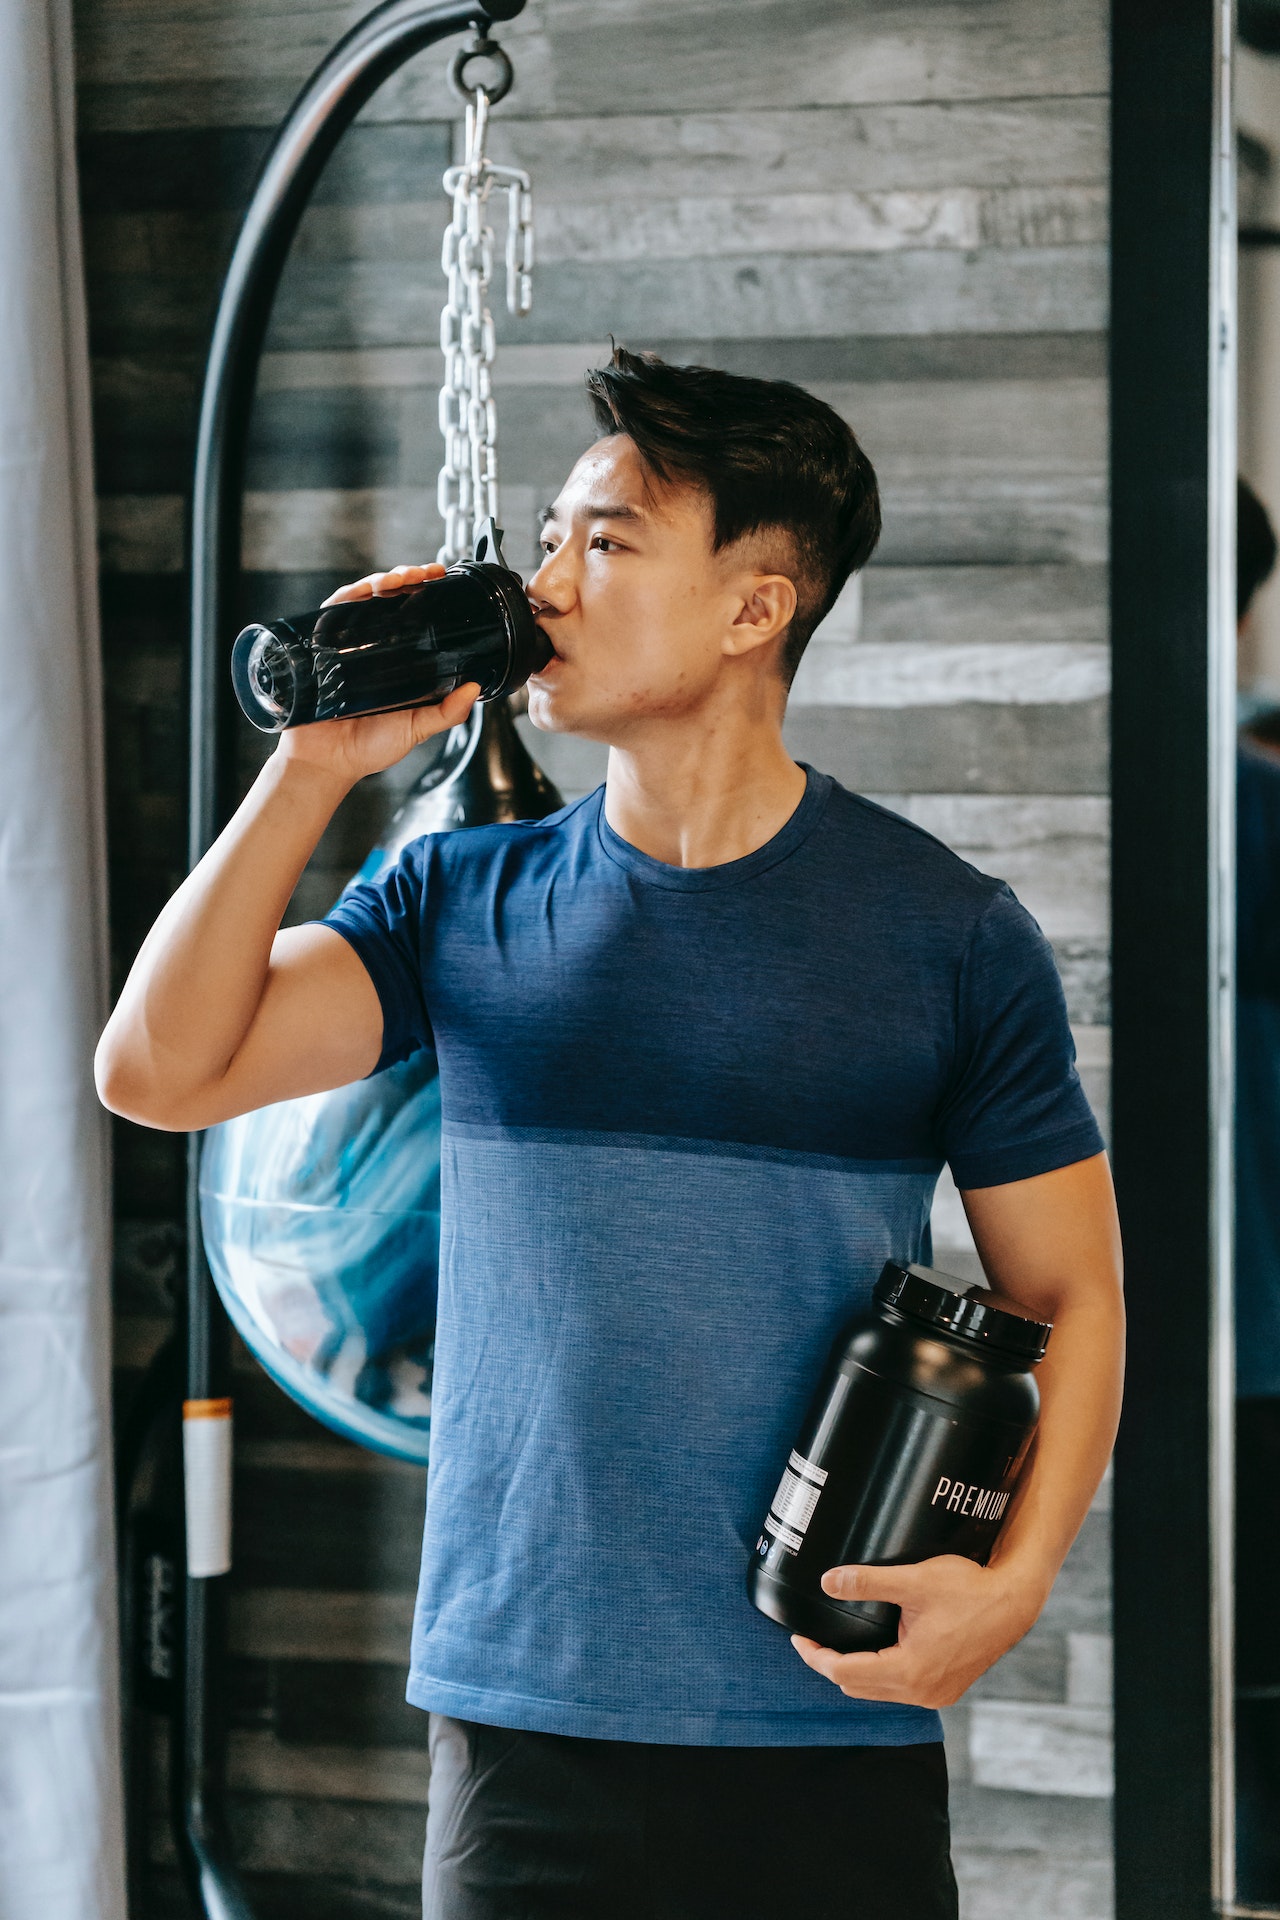 A man wearing a blue shirt is drinking from a black tumbler while holding a black jar of pre-workout supplements inside the gym